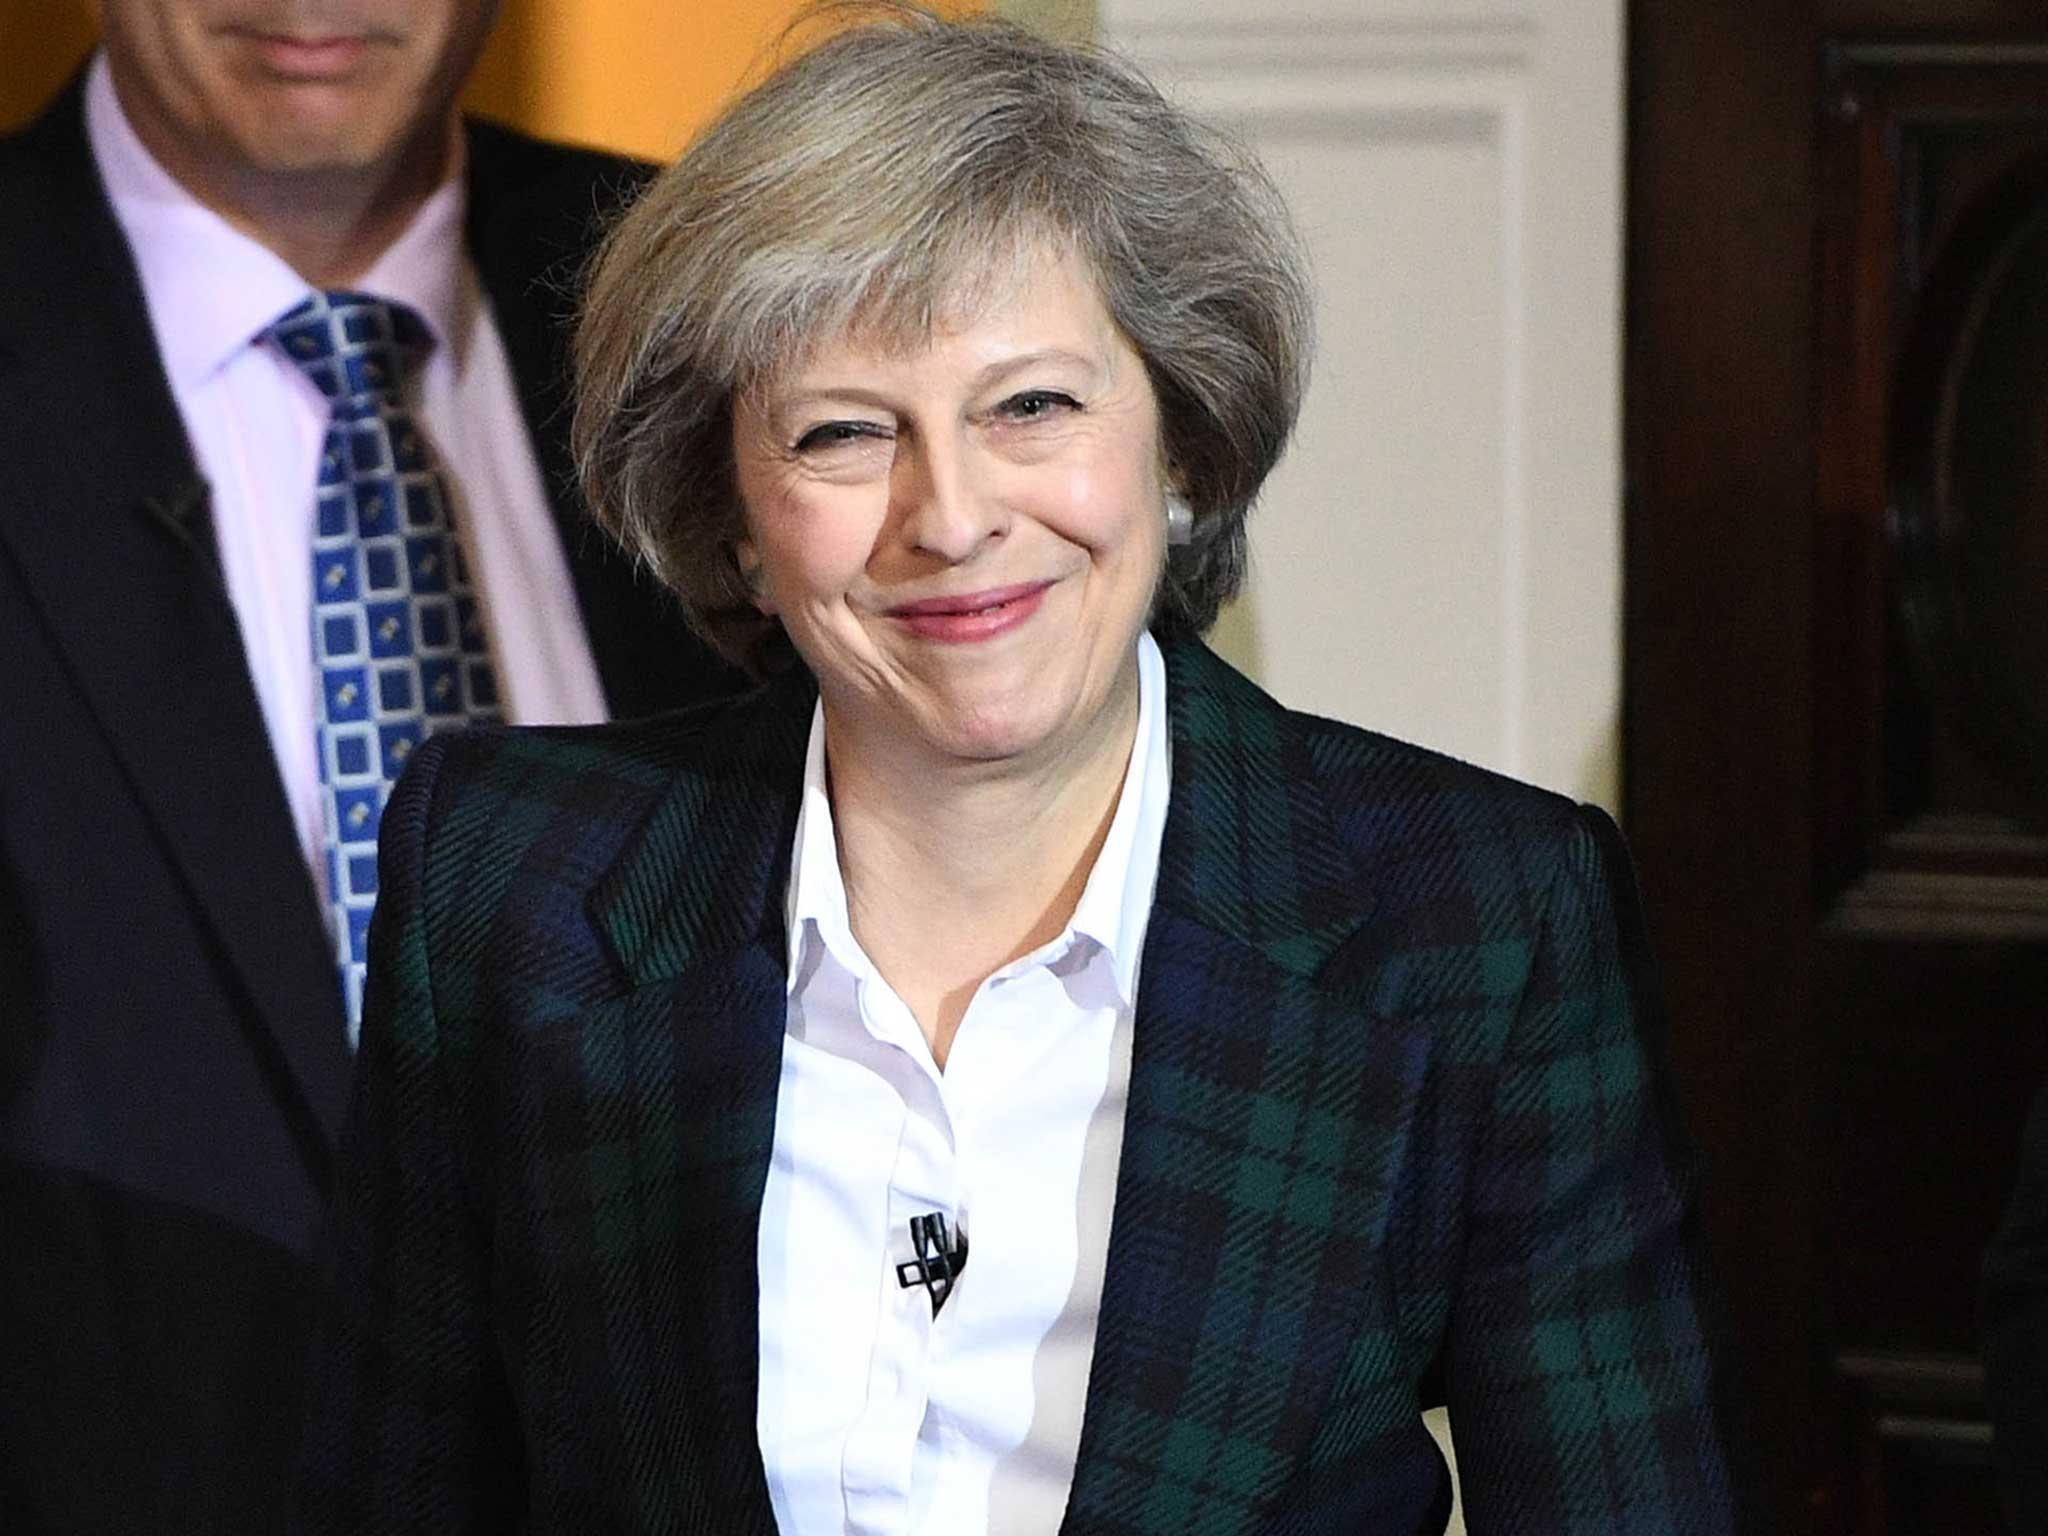 Theresa May has announced her candidacy for leader of the Conservative Party